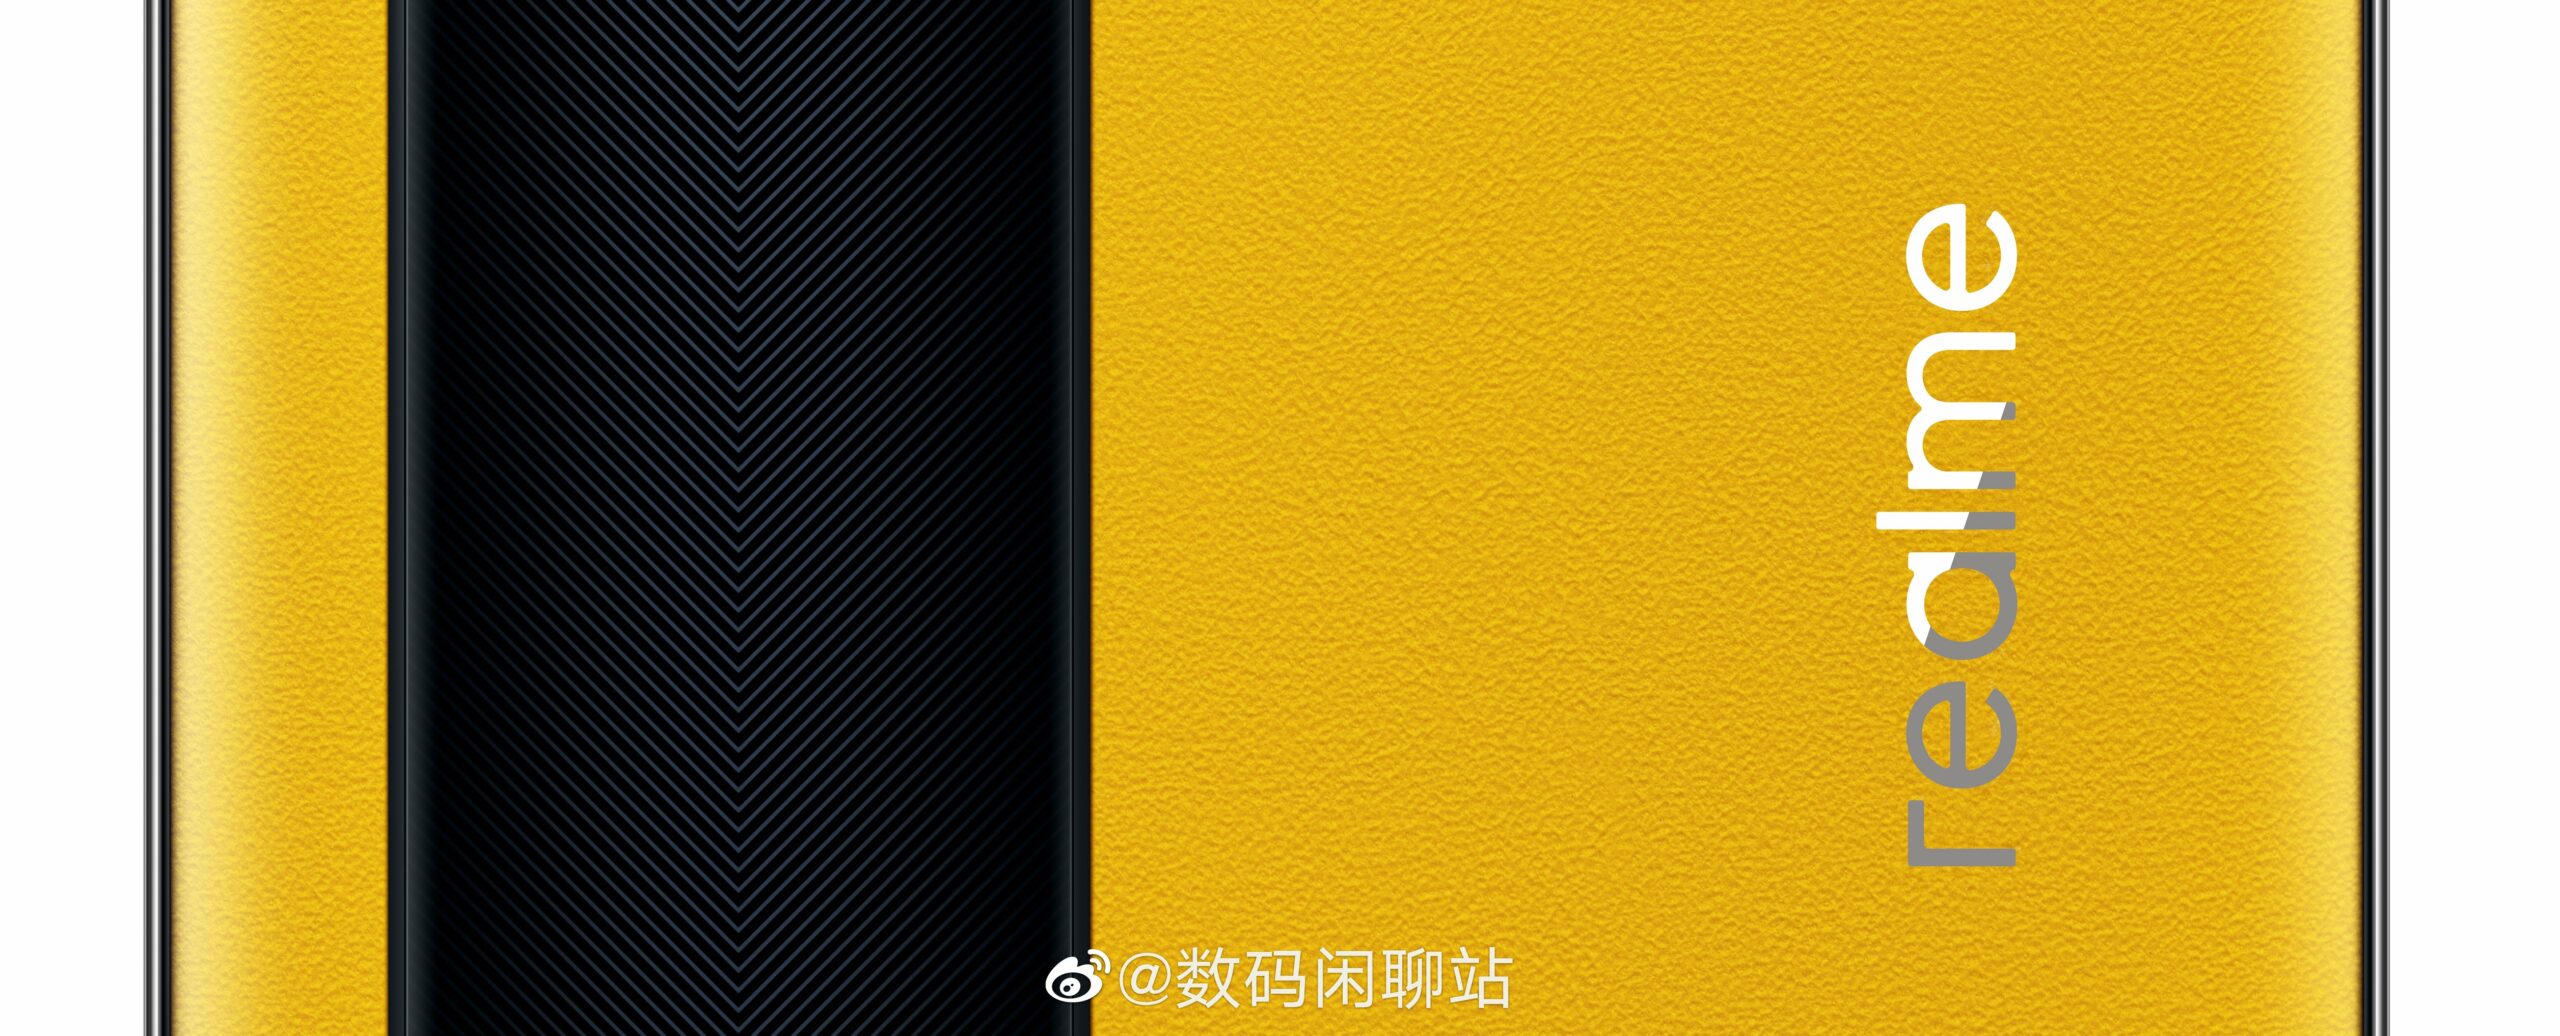 Realme GT's “Bumblebee” leather edition.